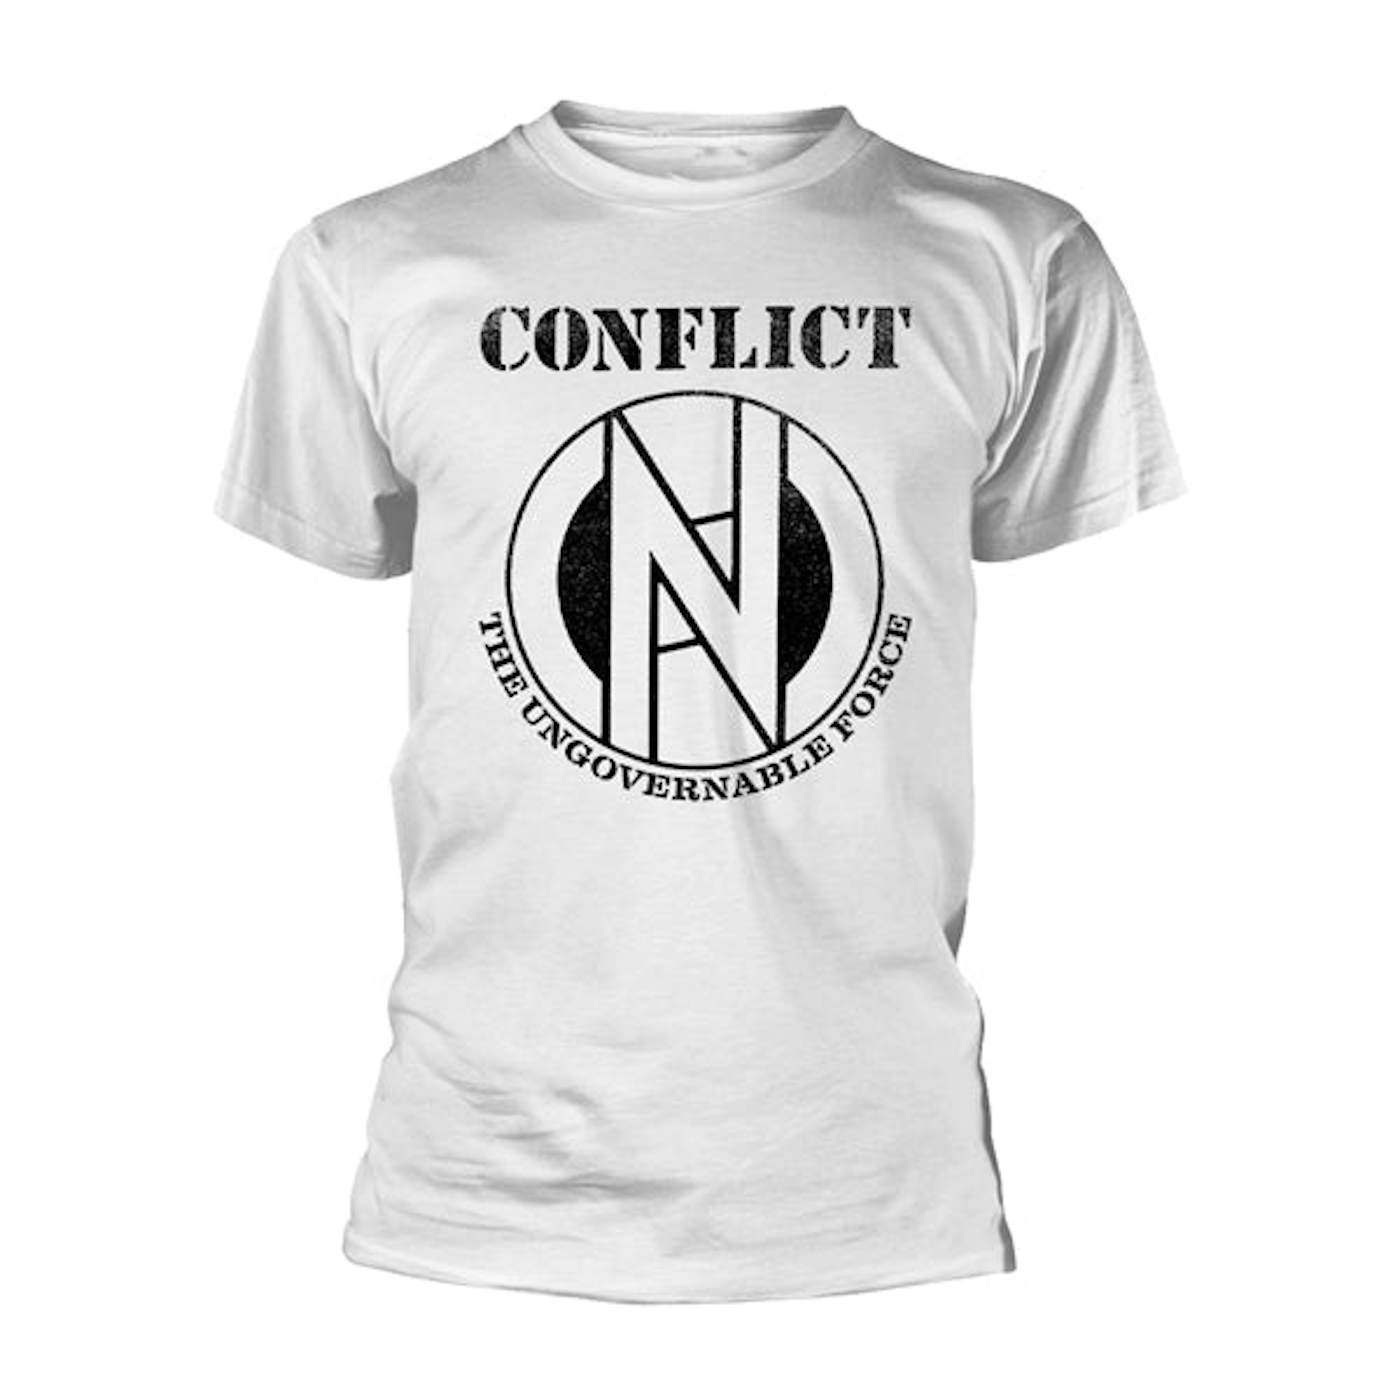 Conflict T Shirt - Standard Issue (White)